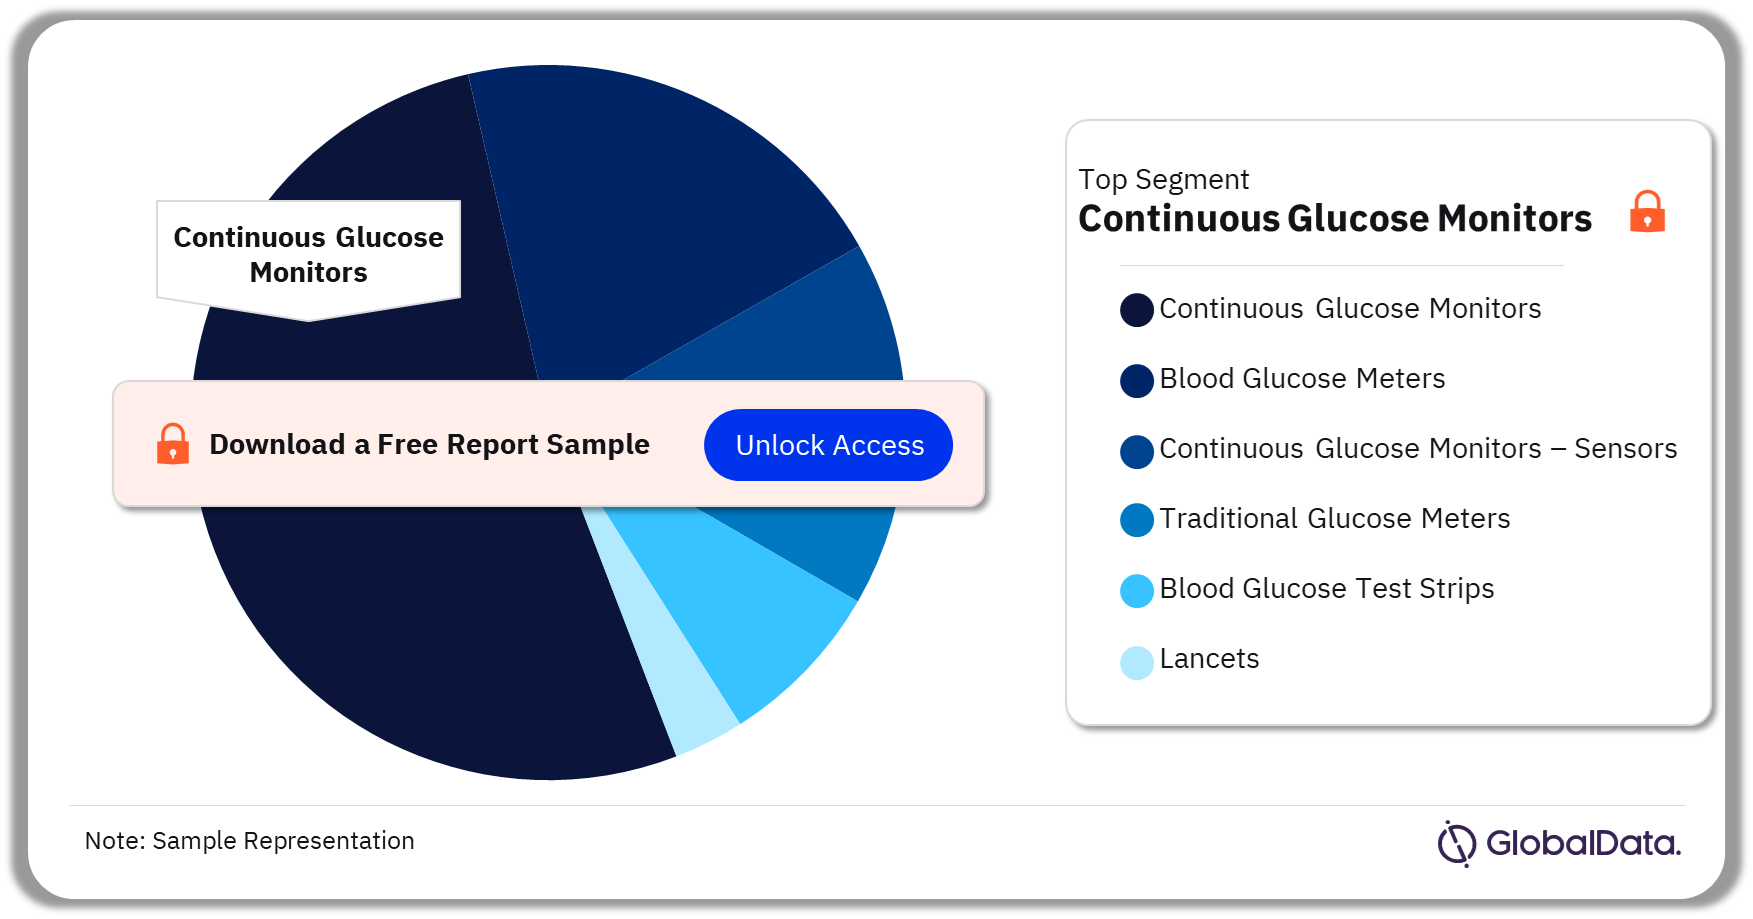 Glucose Monitoring Pipeline Market Analysis by Segments, 2023 (%)